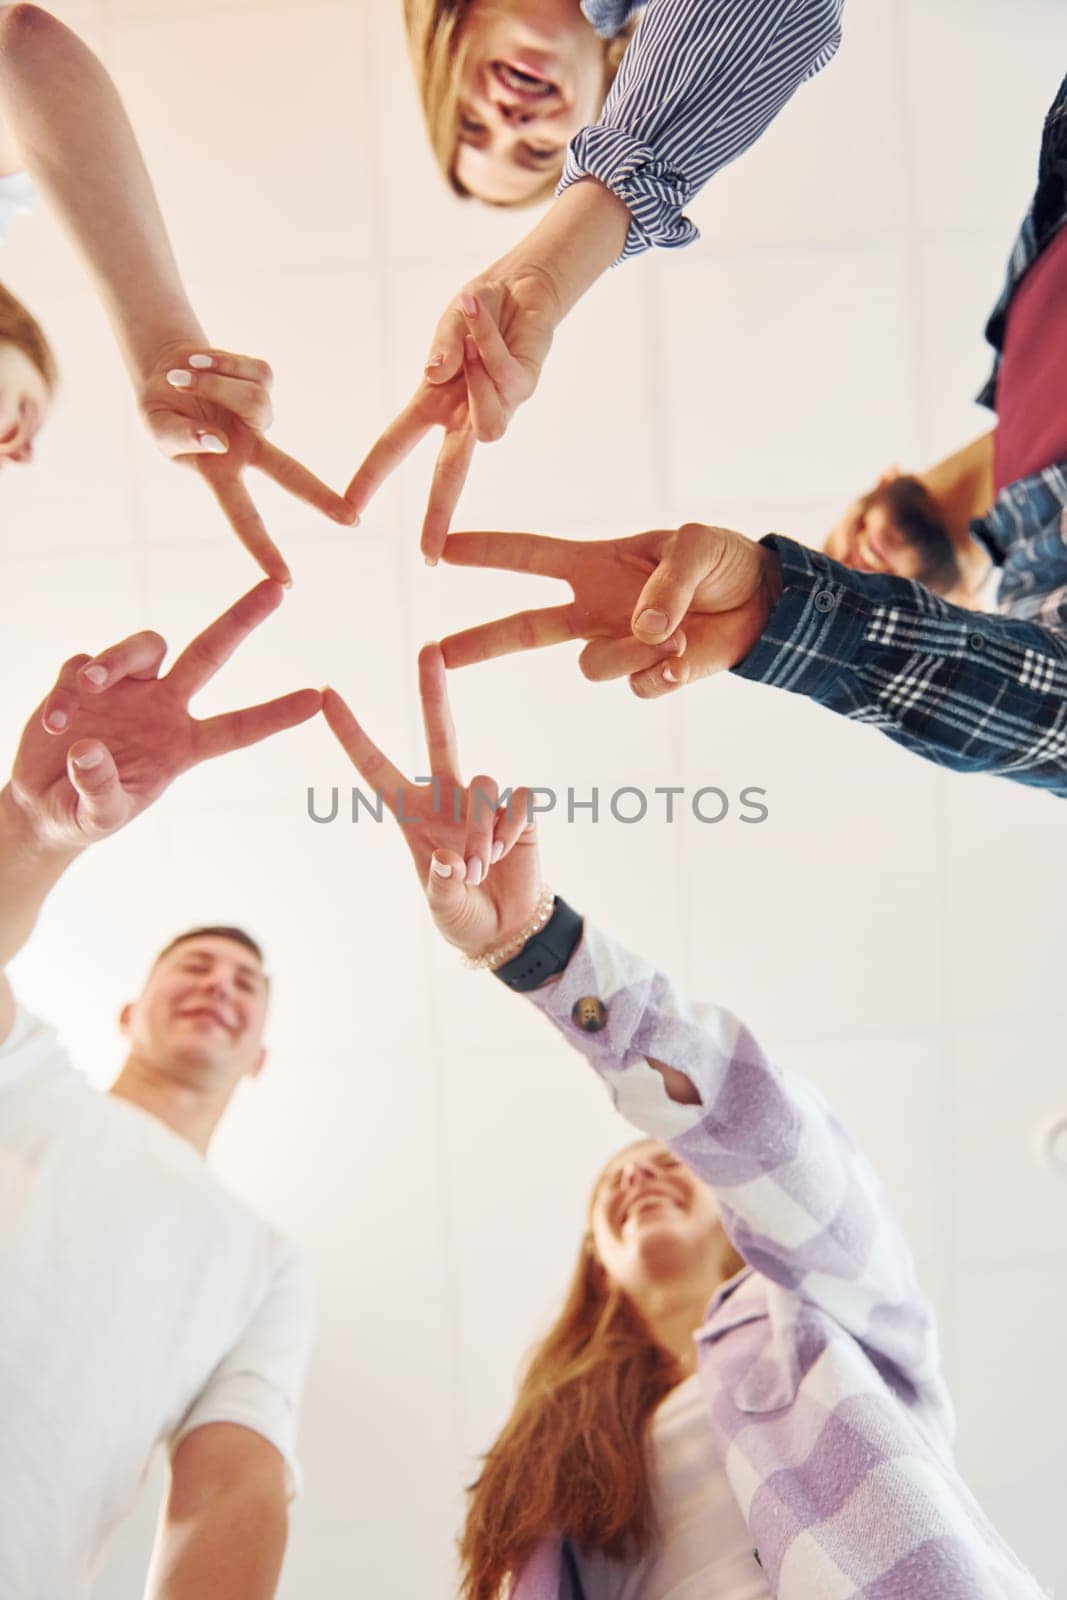 Making gesture by hands. Group of friends standing together.